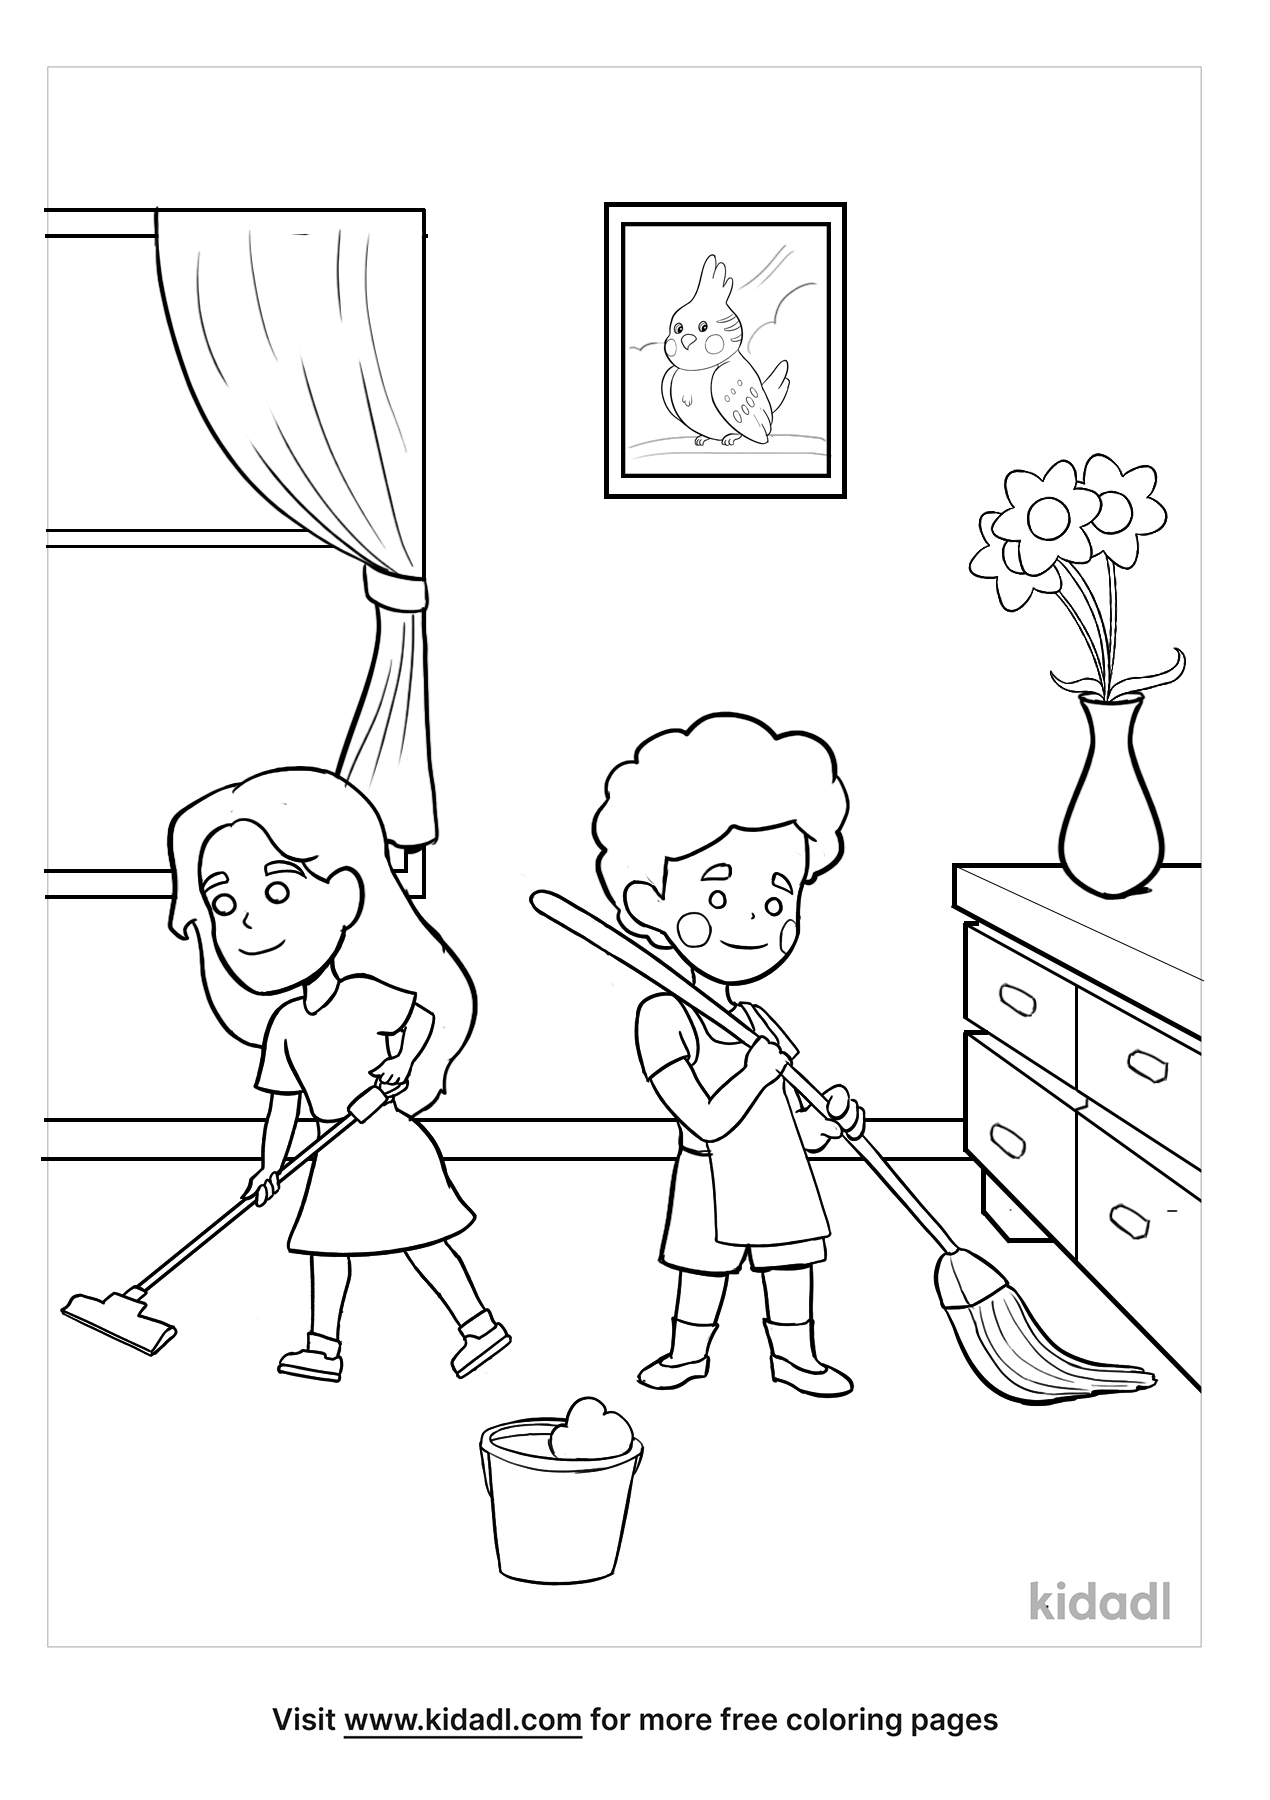 Cleaning Room Coloring Pages | Free At Home Coloring Pages | Kidadl